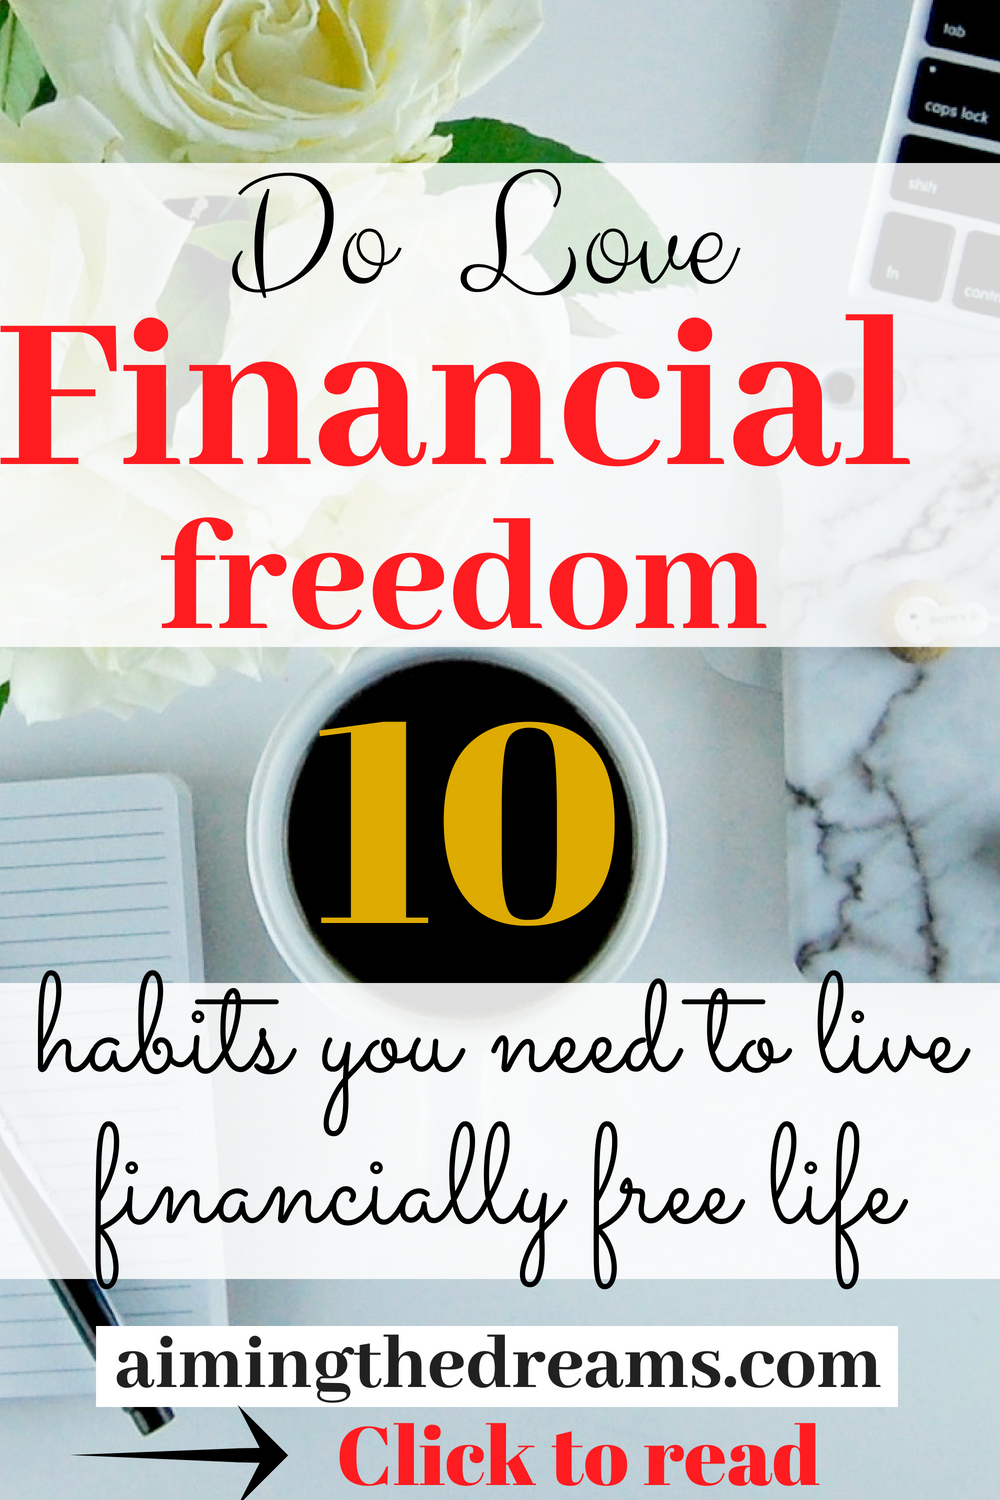 Everybody love financial freedom for which you need to change your financial habits. Learn those that make you grow your wealth.